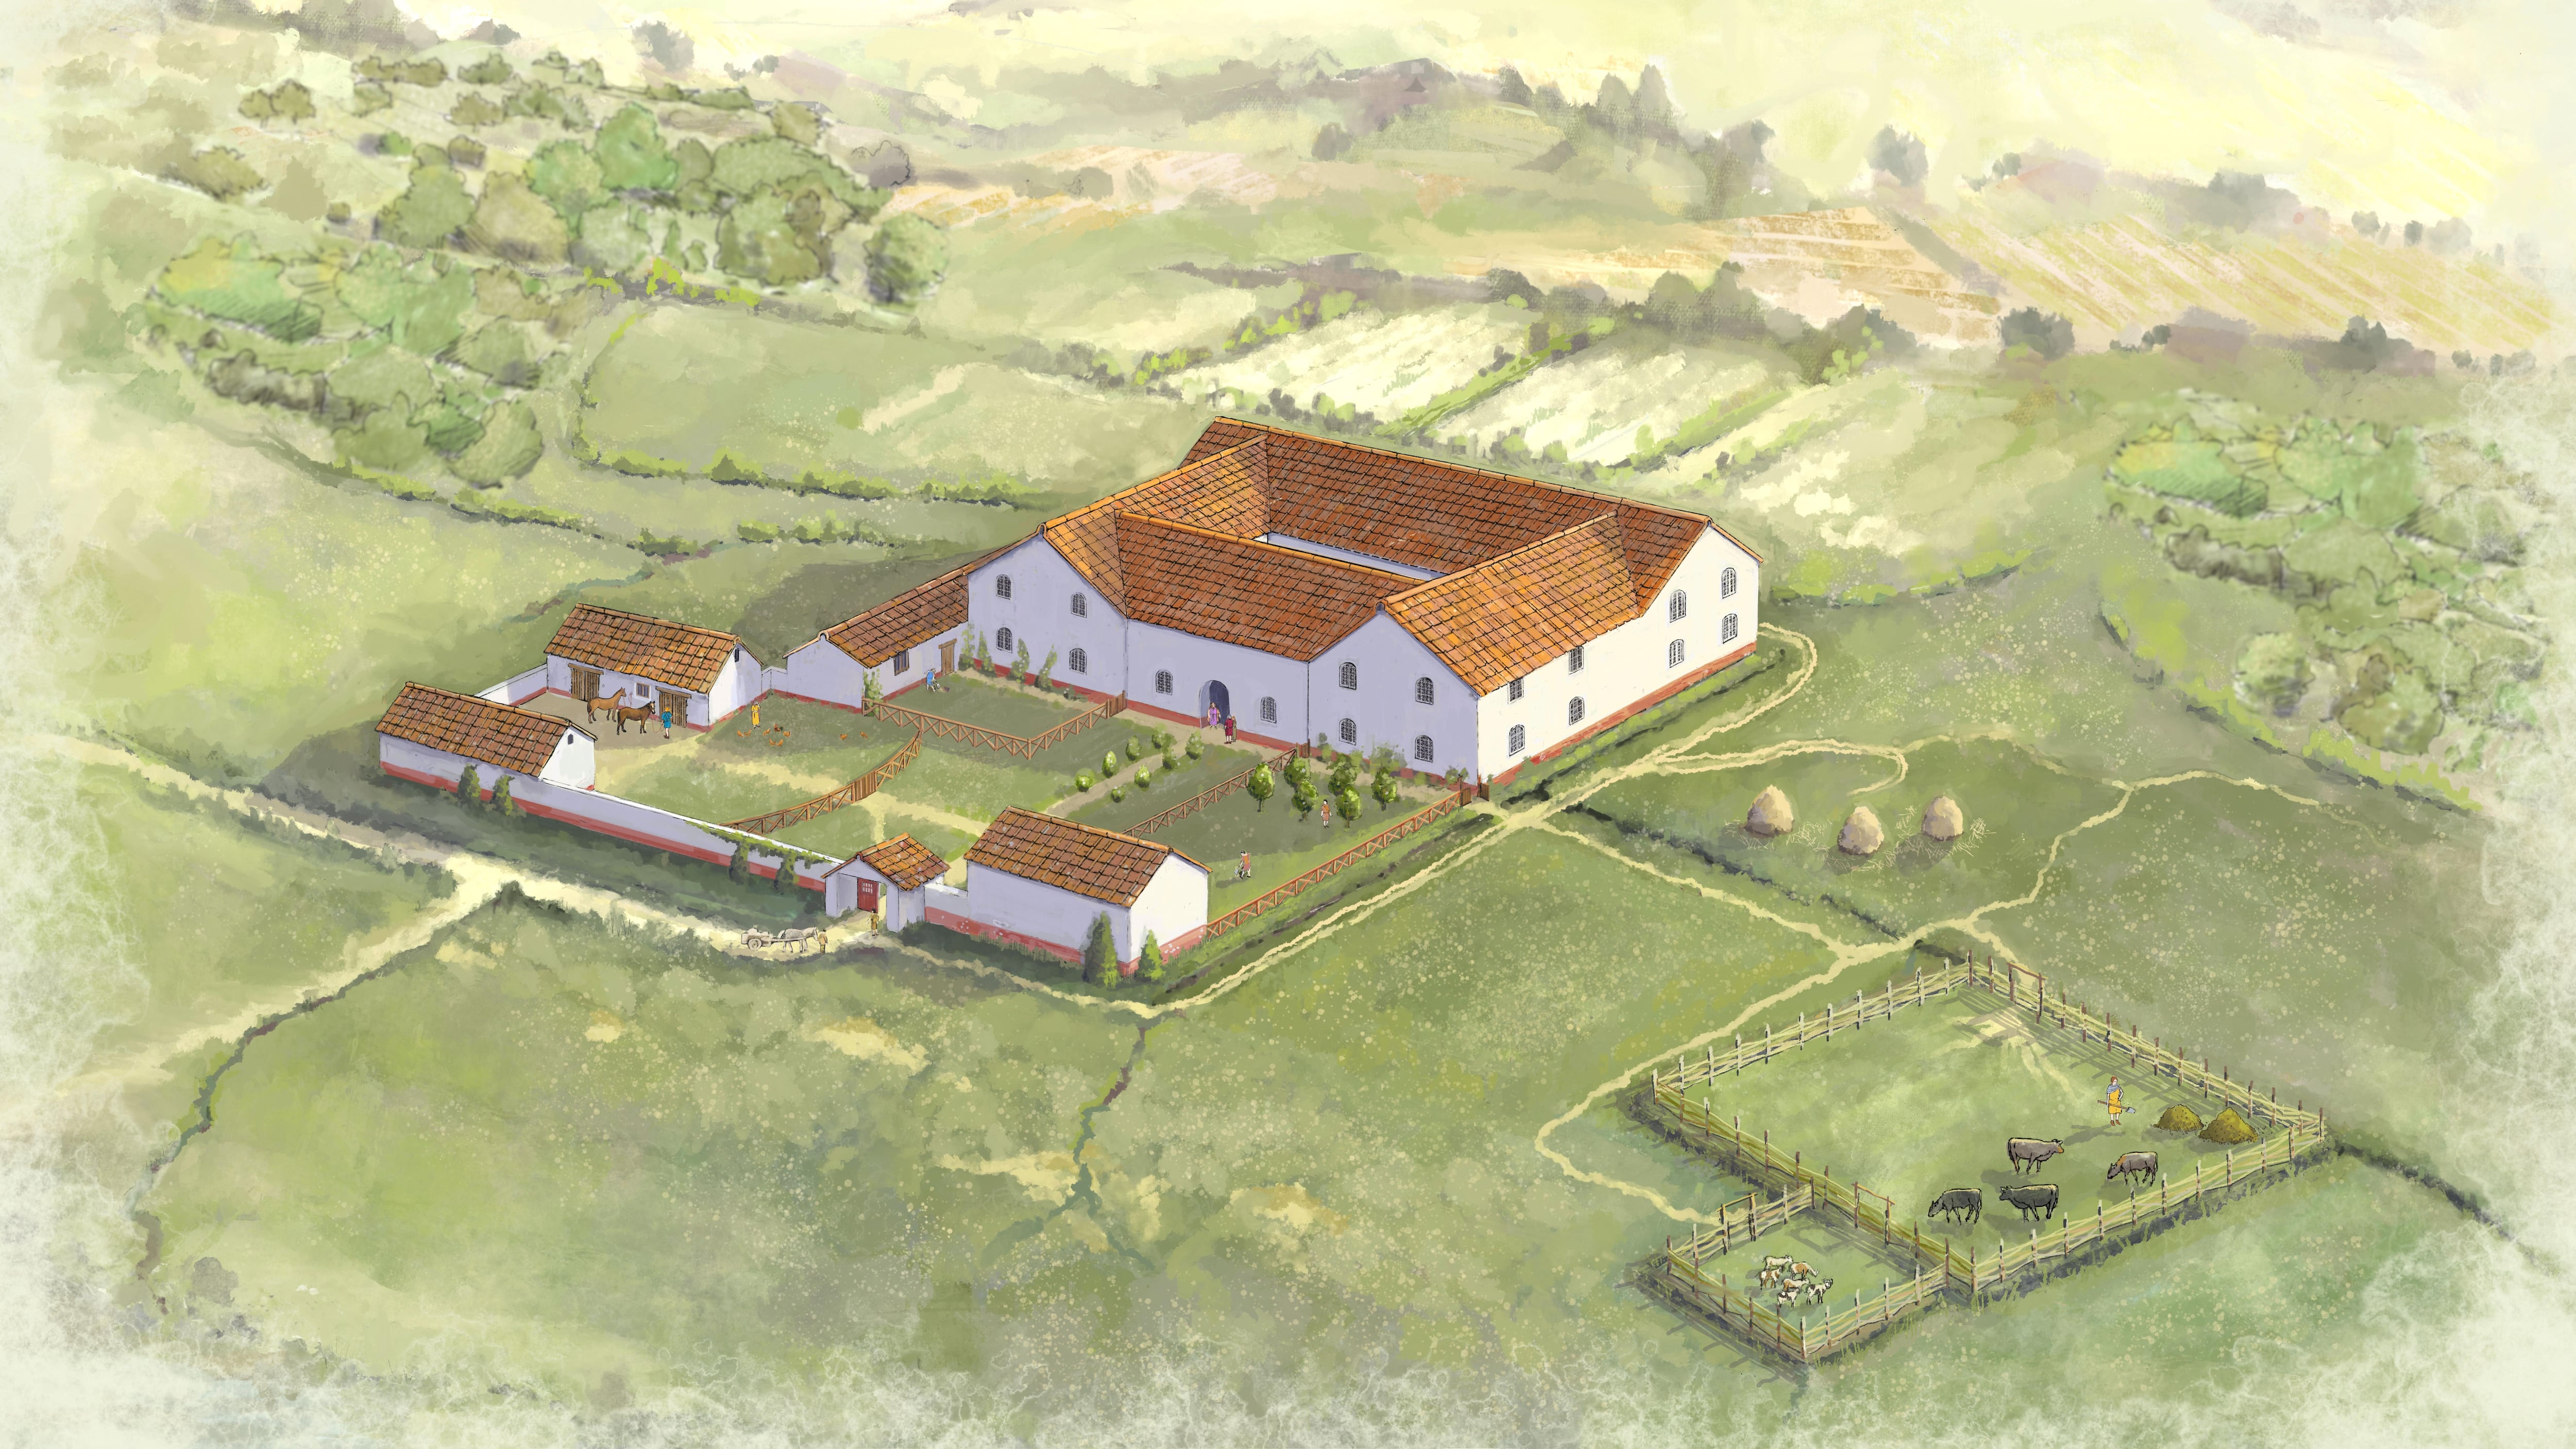 A large-scale geophysical survey of the National Trust’s Attingham Park estate in Shropshire as part of plans to restore nature has uncovered evidence of two previously-unknown Roman villas